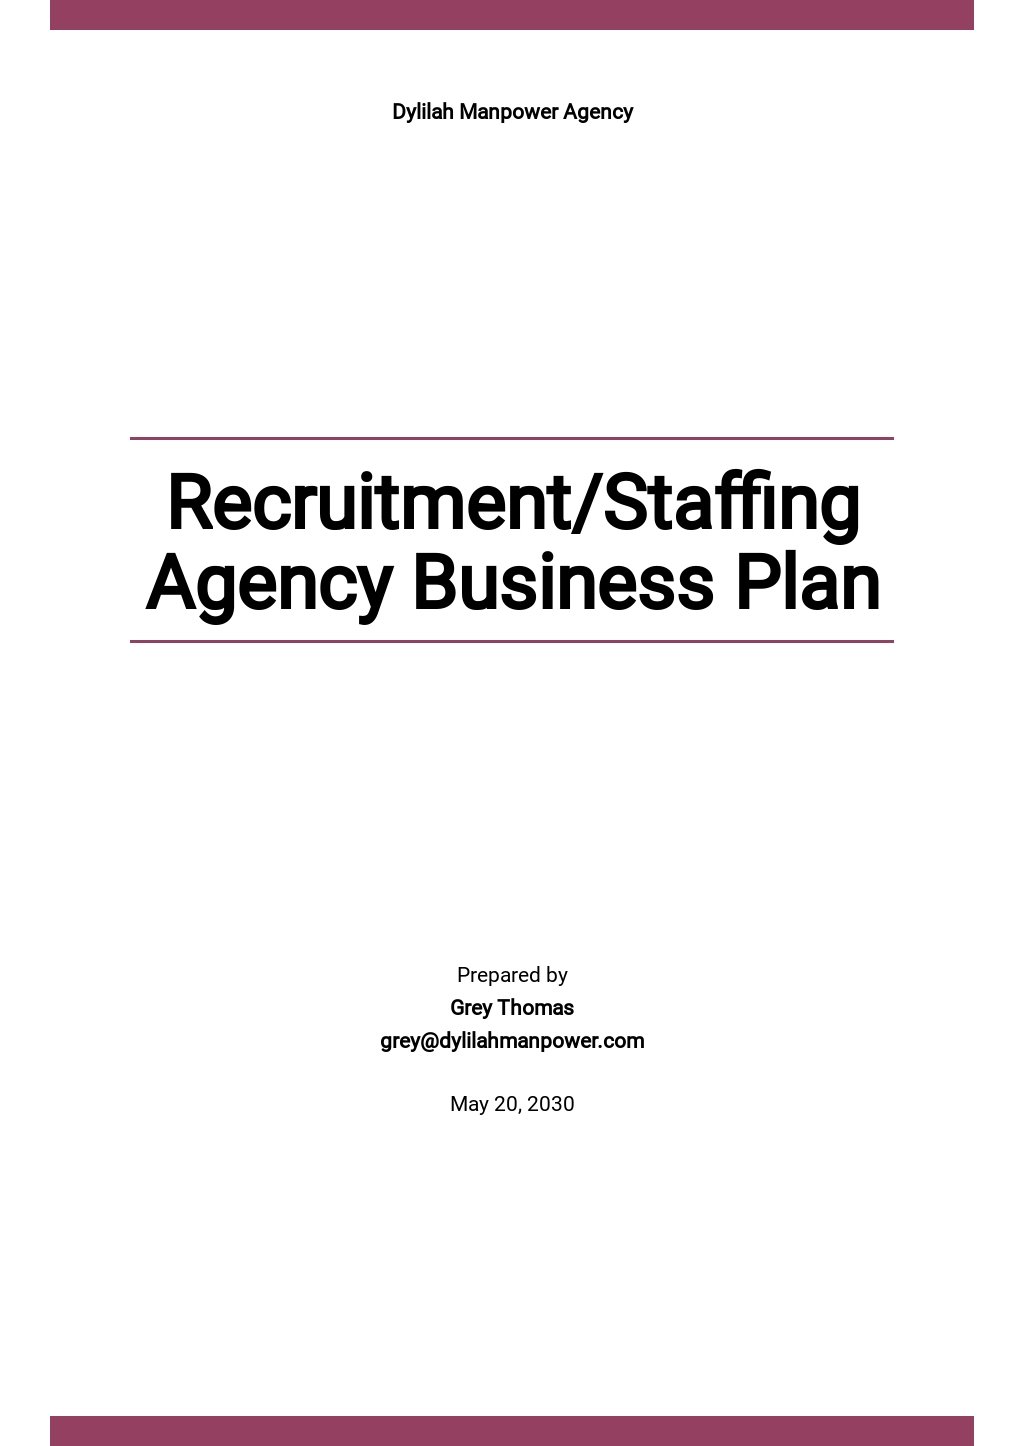 sample of a business plan for a recruitment agency